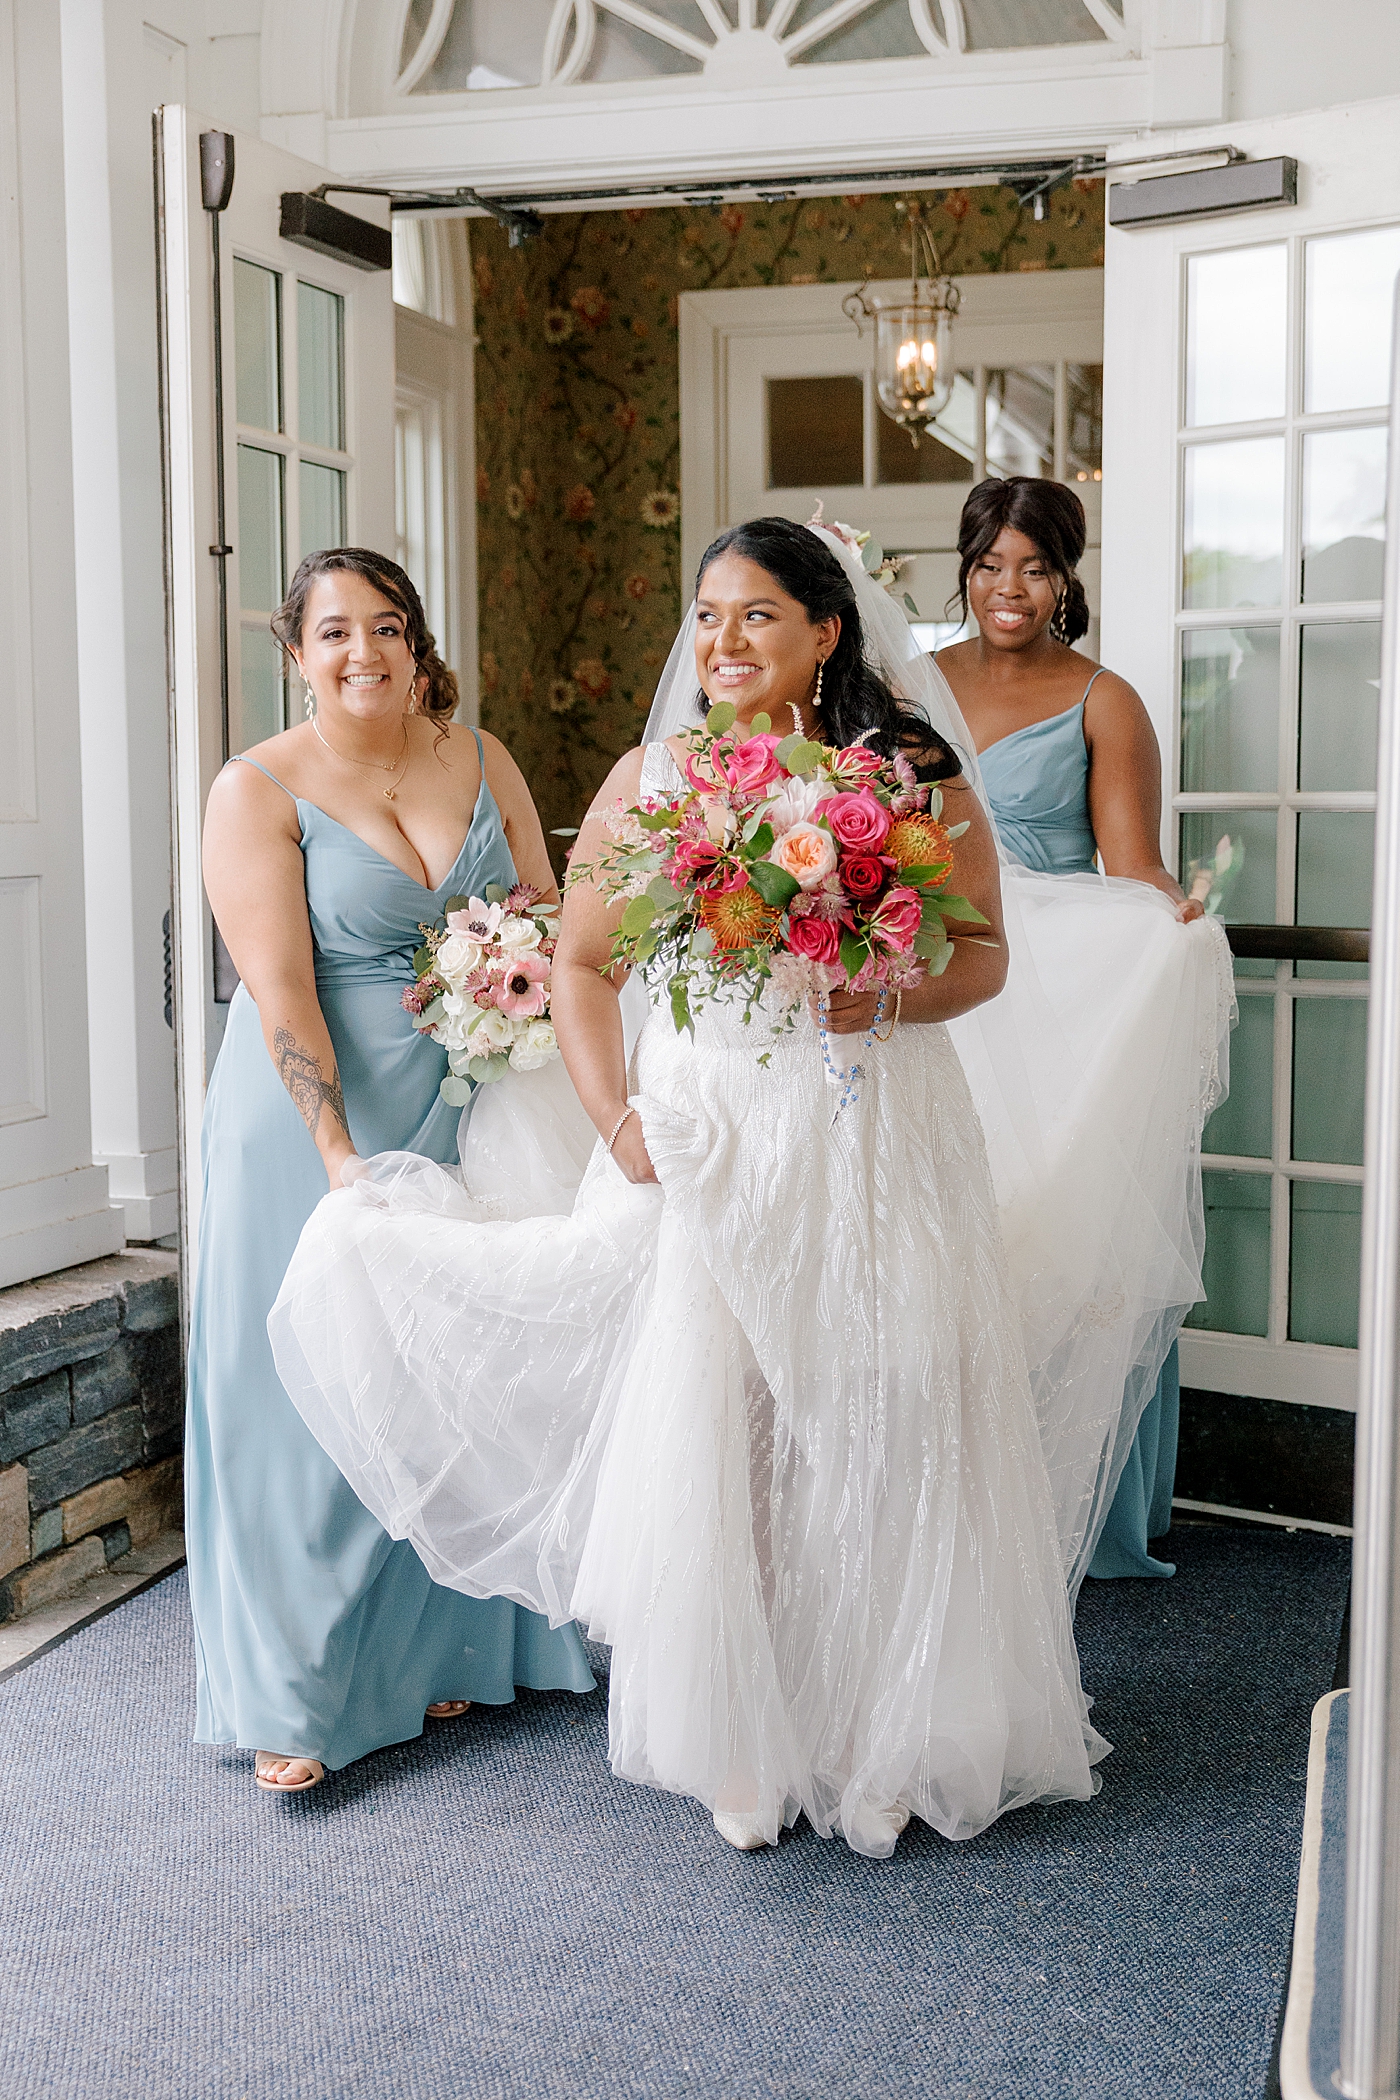 Bridesmaids helping a bride with colorful bridal bouquet walk in her dress | Image by Hope Helmuth Photography